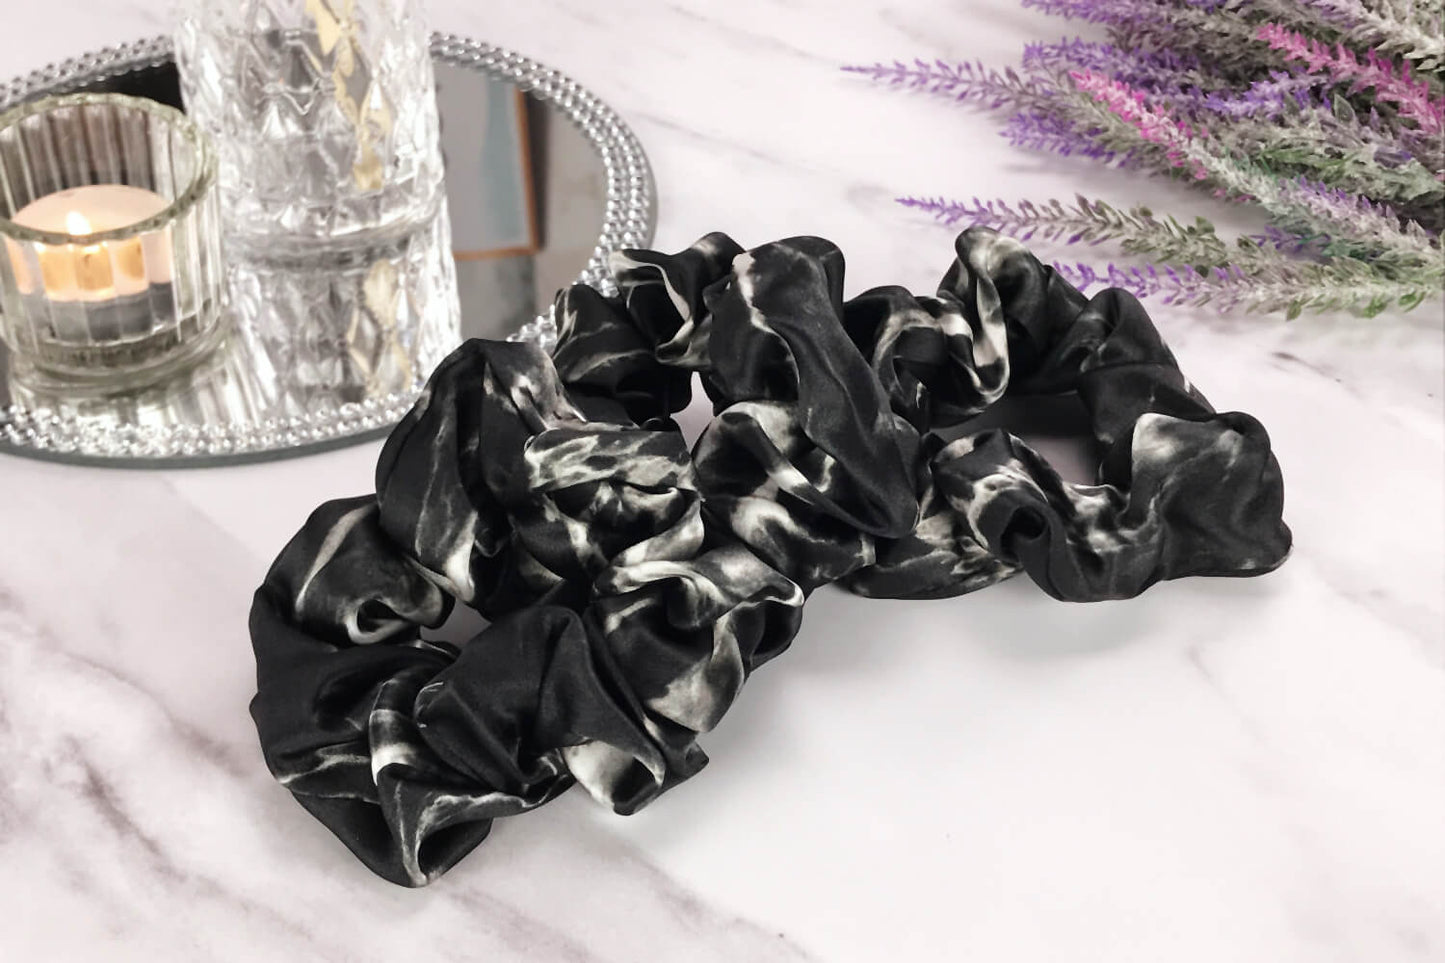 Celestial Silk large black marble silk scrunchies laying on marble counter with lavender plant and a candle in the background